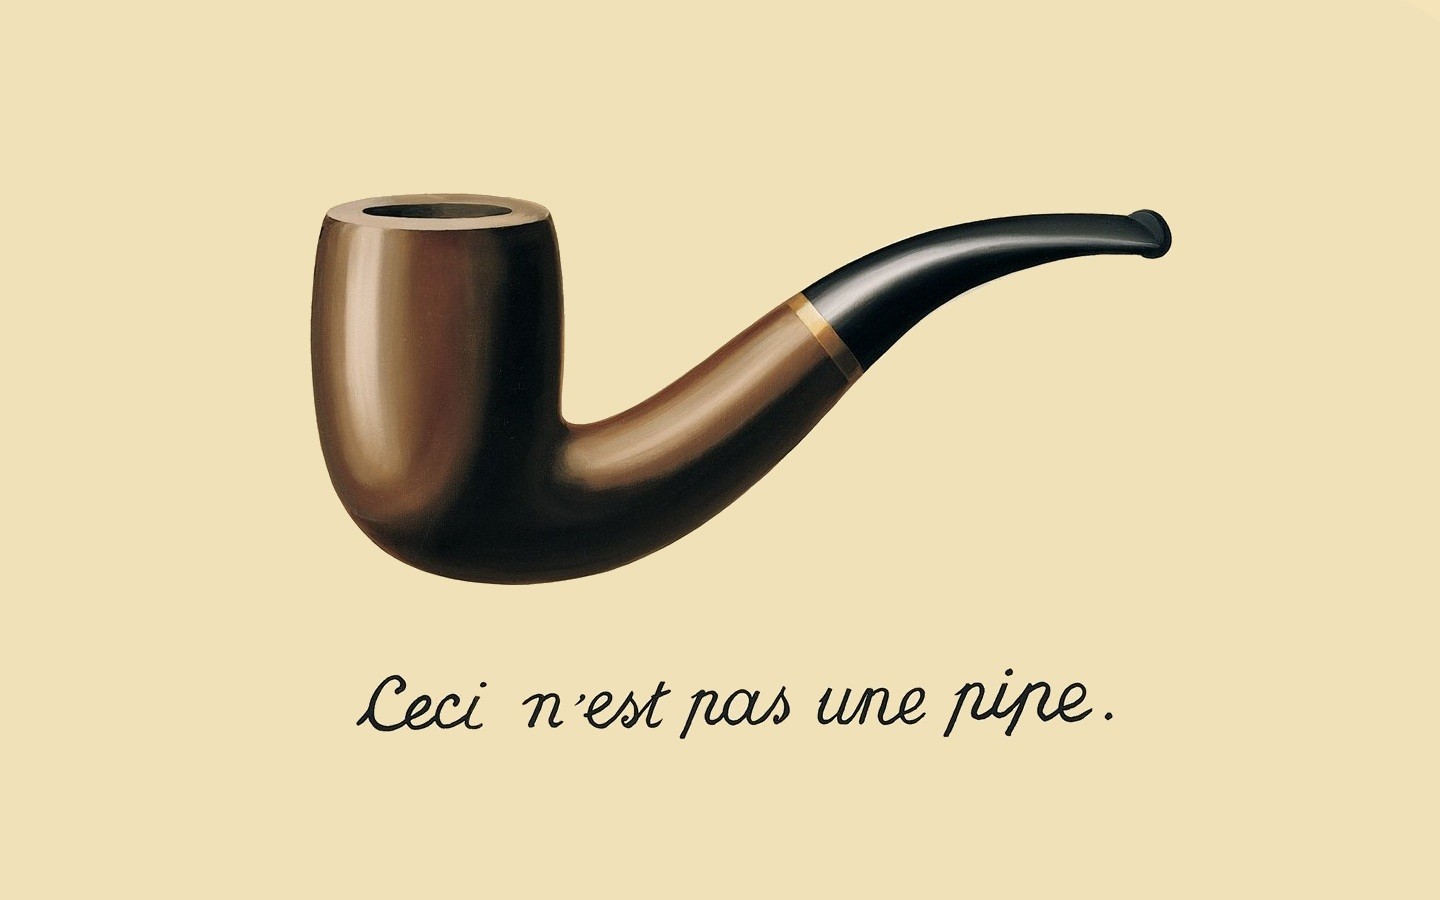 General 1440x900 pipes René Magritte painting surreal minimalism simple background typography text shiny